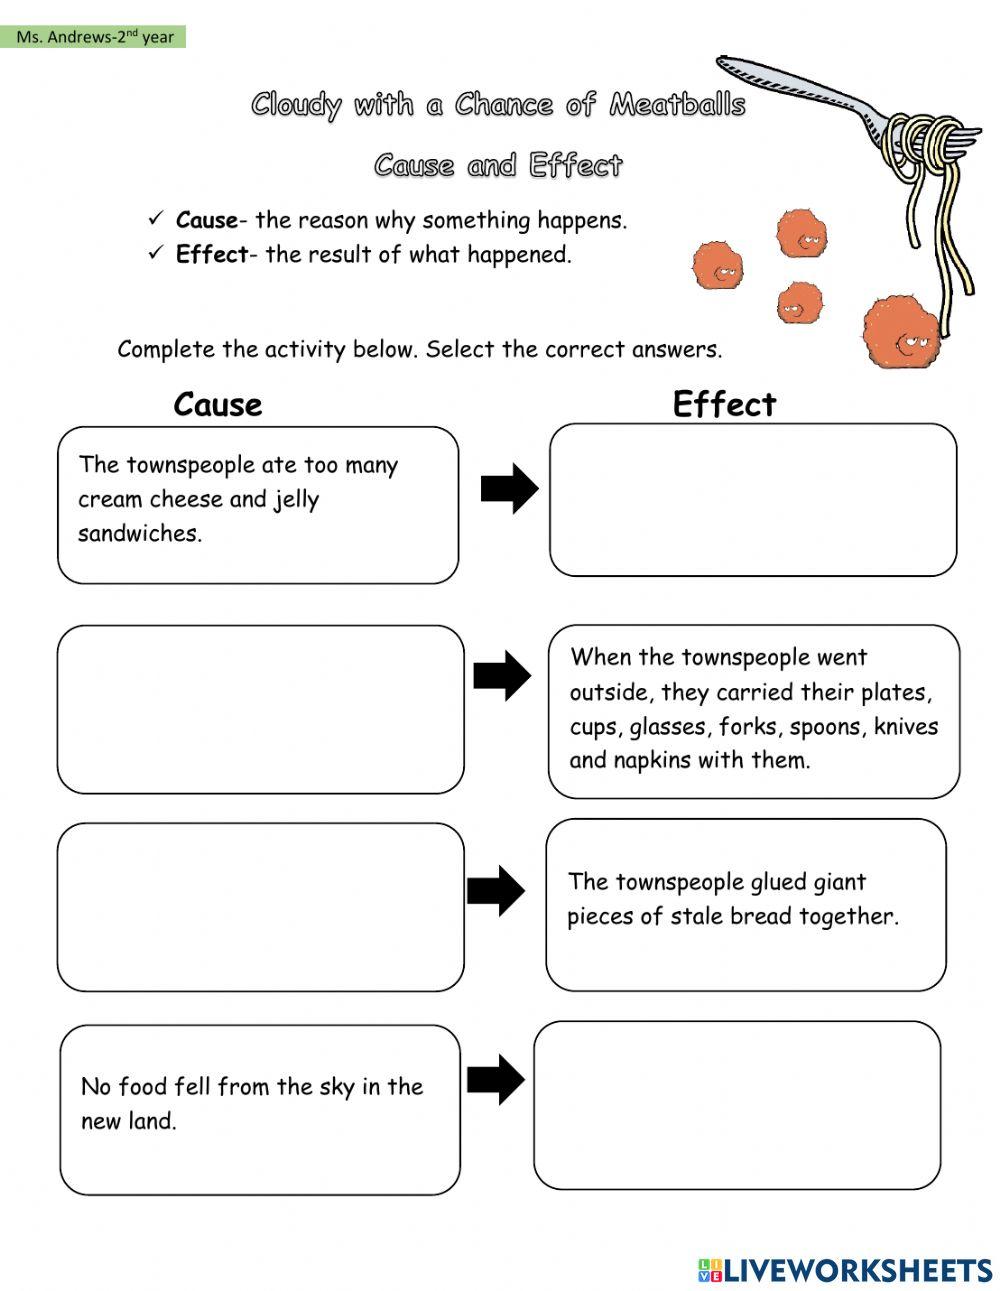 Cloudy With a Chance of Meatballs- Cause and Effect Activity